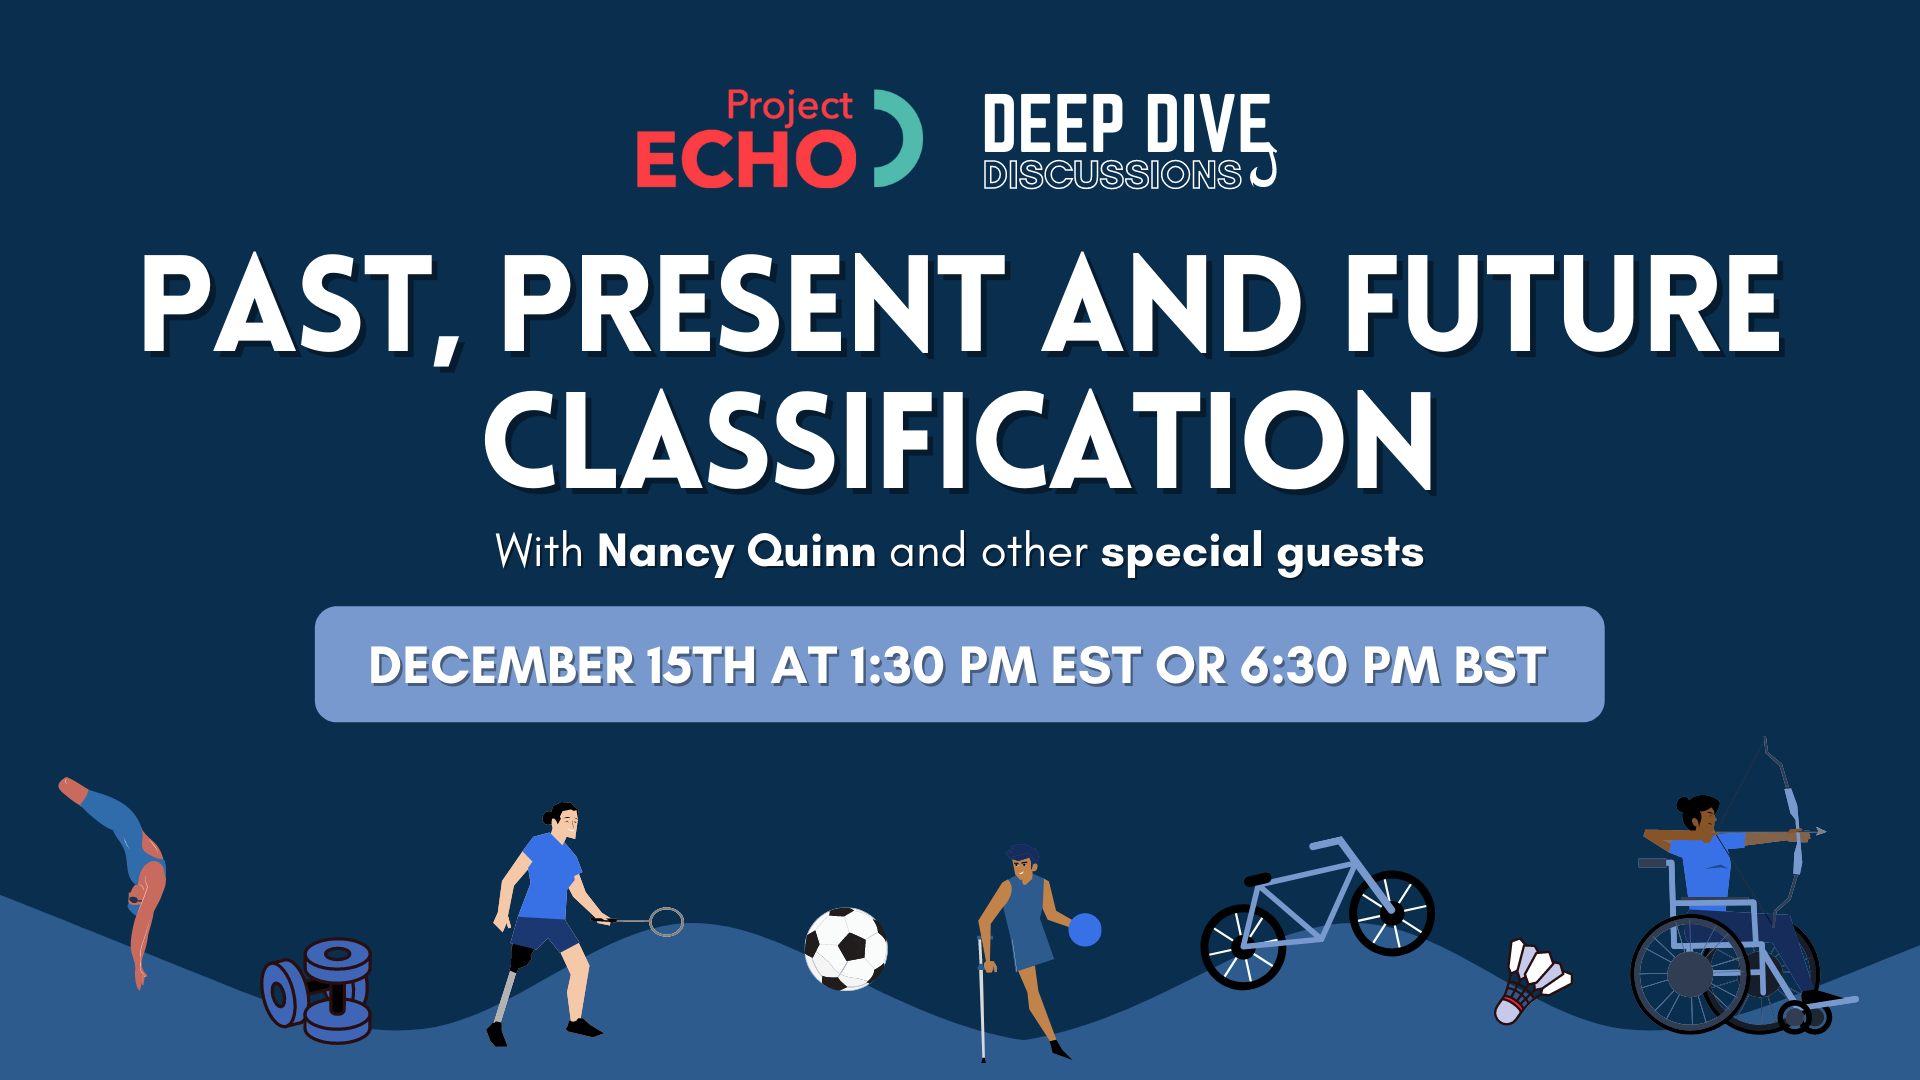 image reading 'deep dive discussion: past, present and future classification with nancy quinn and other special guests. december 15th at 1:30 pm est or 6:30 pm bst".